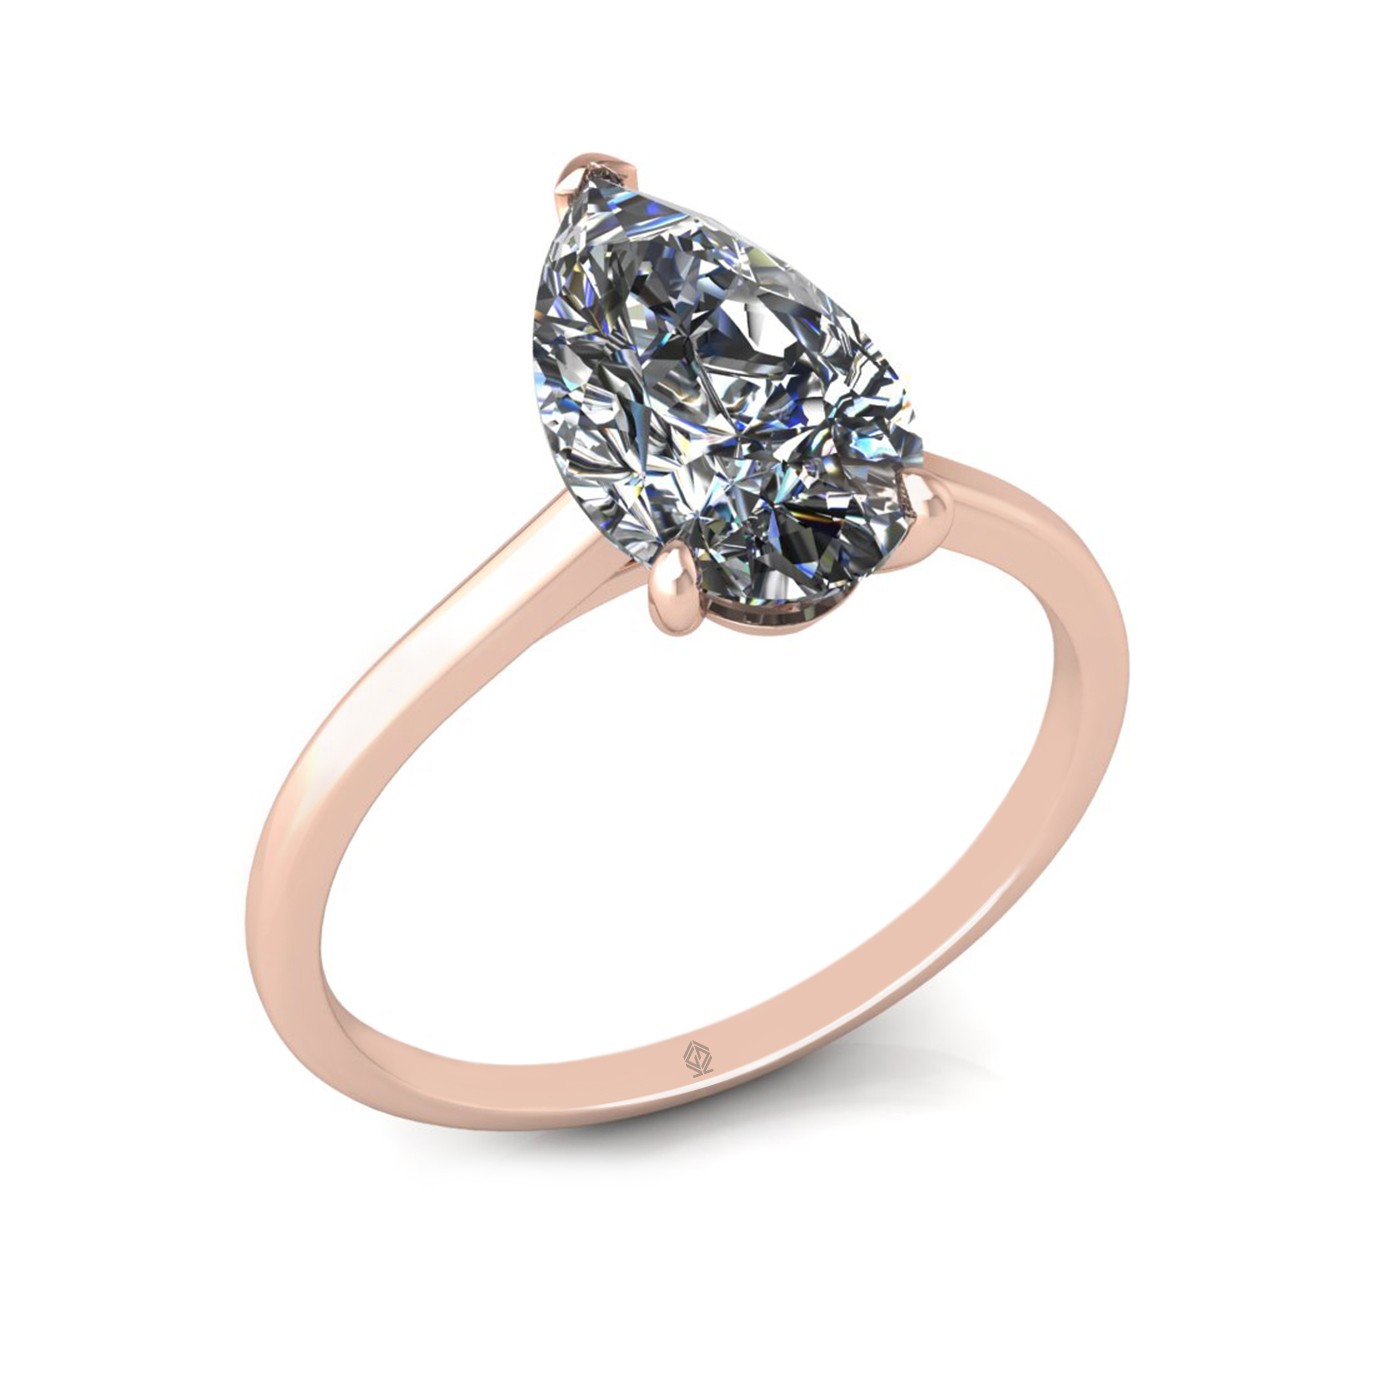 18k rose gold  1,50 ct 3 prongs solitaire pear cut diamond engagement ring with whisper thin band